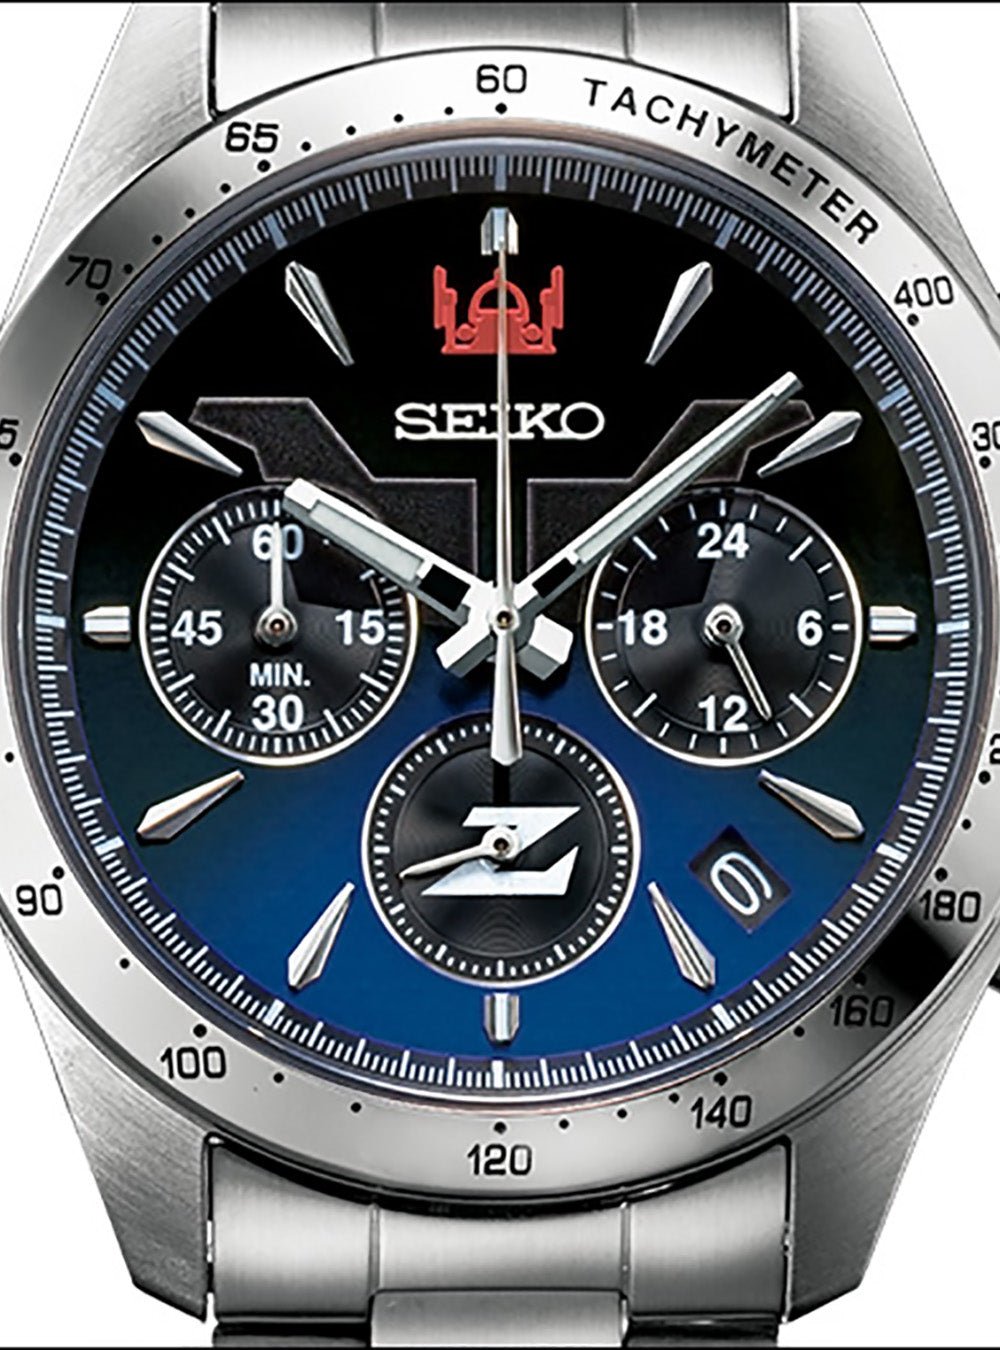 SEIKO x MAZINGER (TRANZOR) Z 50TH ANNIVERSARY WATCH MADE IN JAPAN LIMITED  EDITION